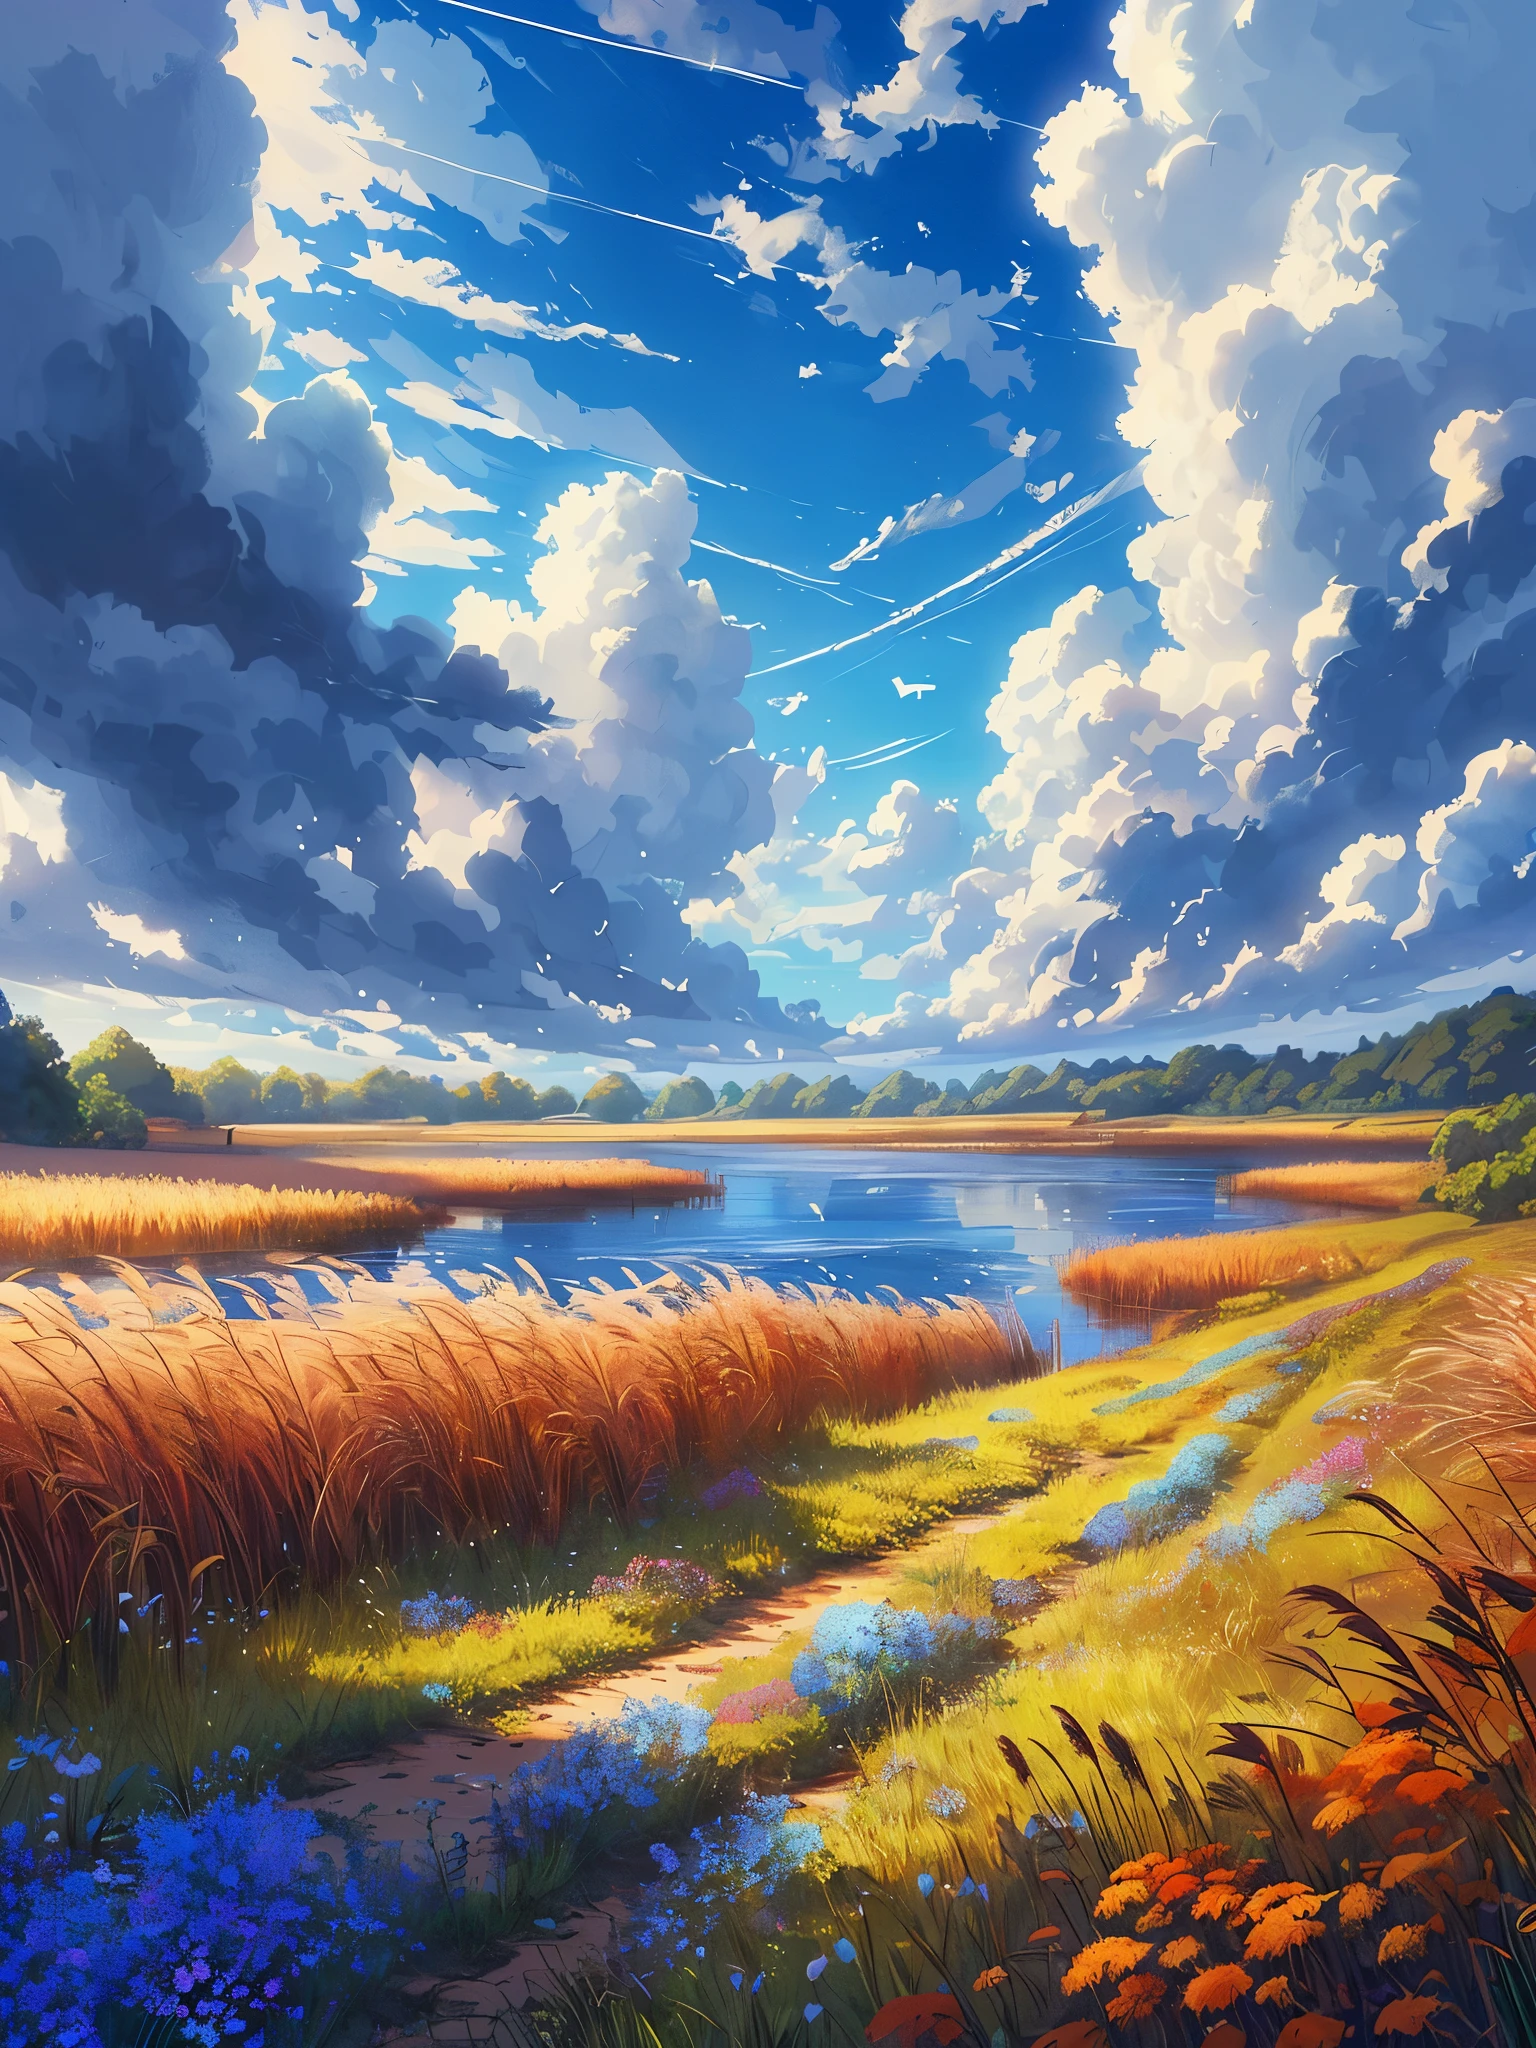 Draw an anime scene of fields near river，There are reeds on the shore，Autumn landscape, lofi, blue cloudy vast sky,vibrant colors, wild flowers, windy, peaceful environment